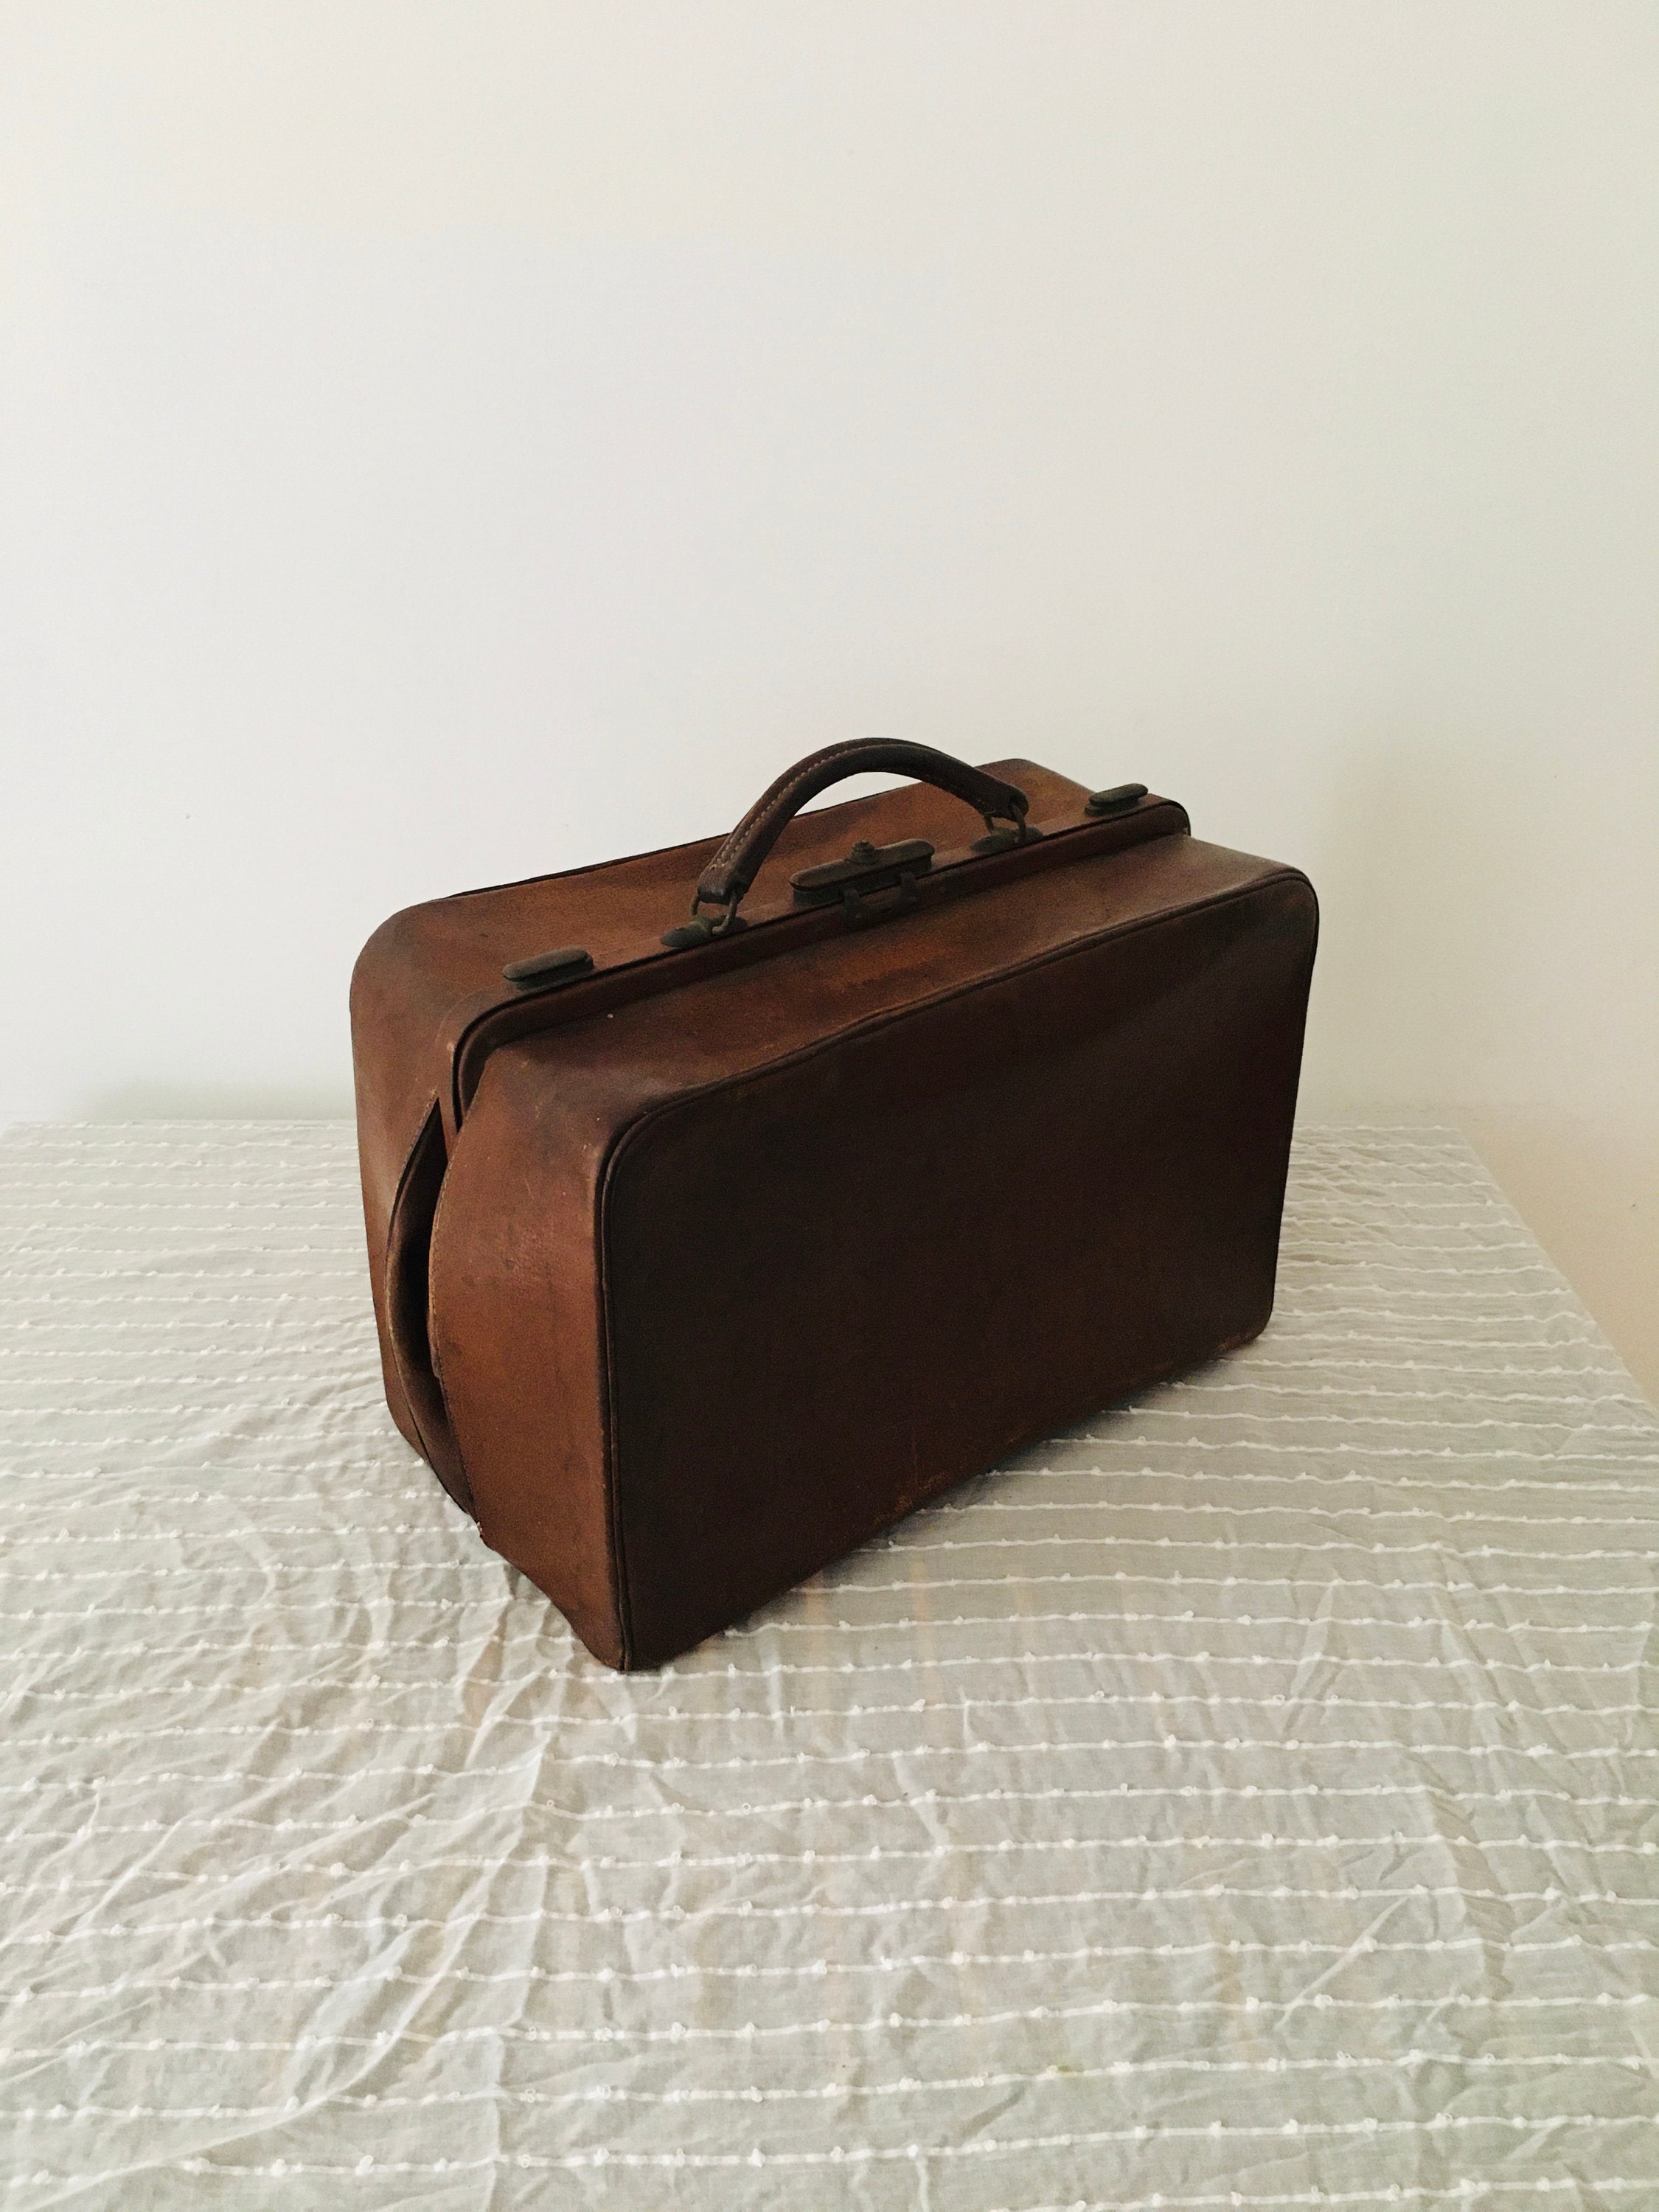 Late 19th century French leather doctor's bag – Chez Pluie